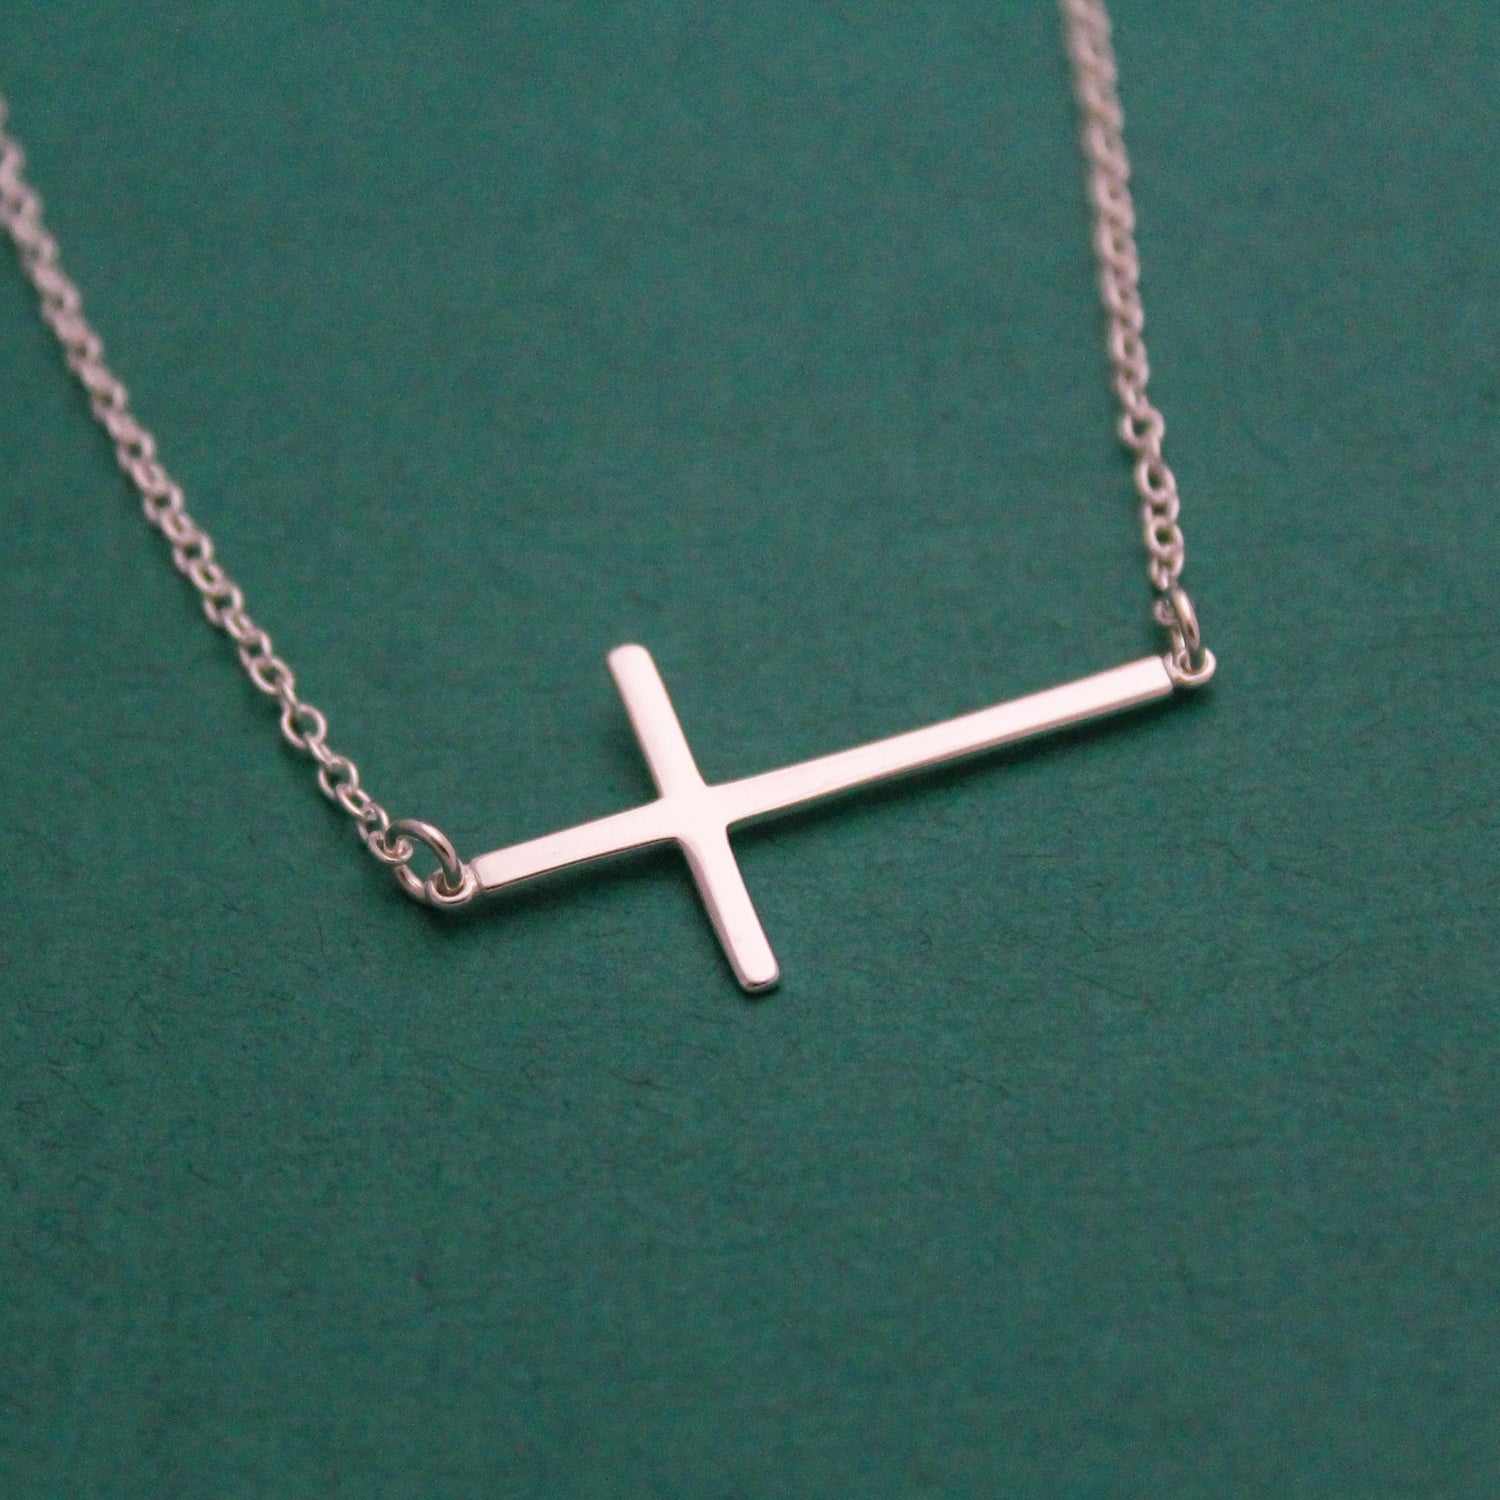 Sterling Silver Cross Bar Necklace, Faith Cross Necklace, Personalized Bar Necklace, Silver Bar Necklace, Unique Hand Stamped Jewelry, Cross